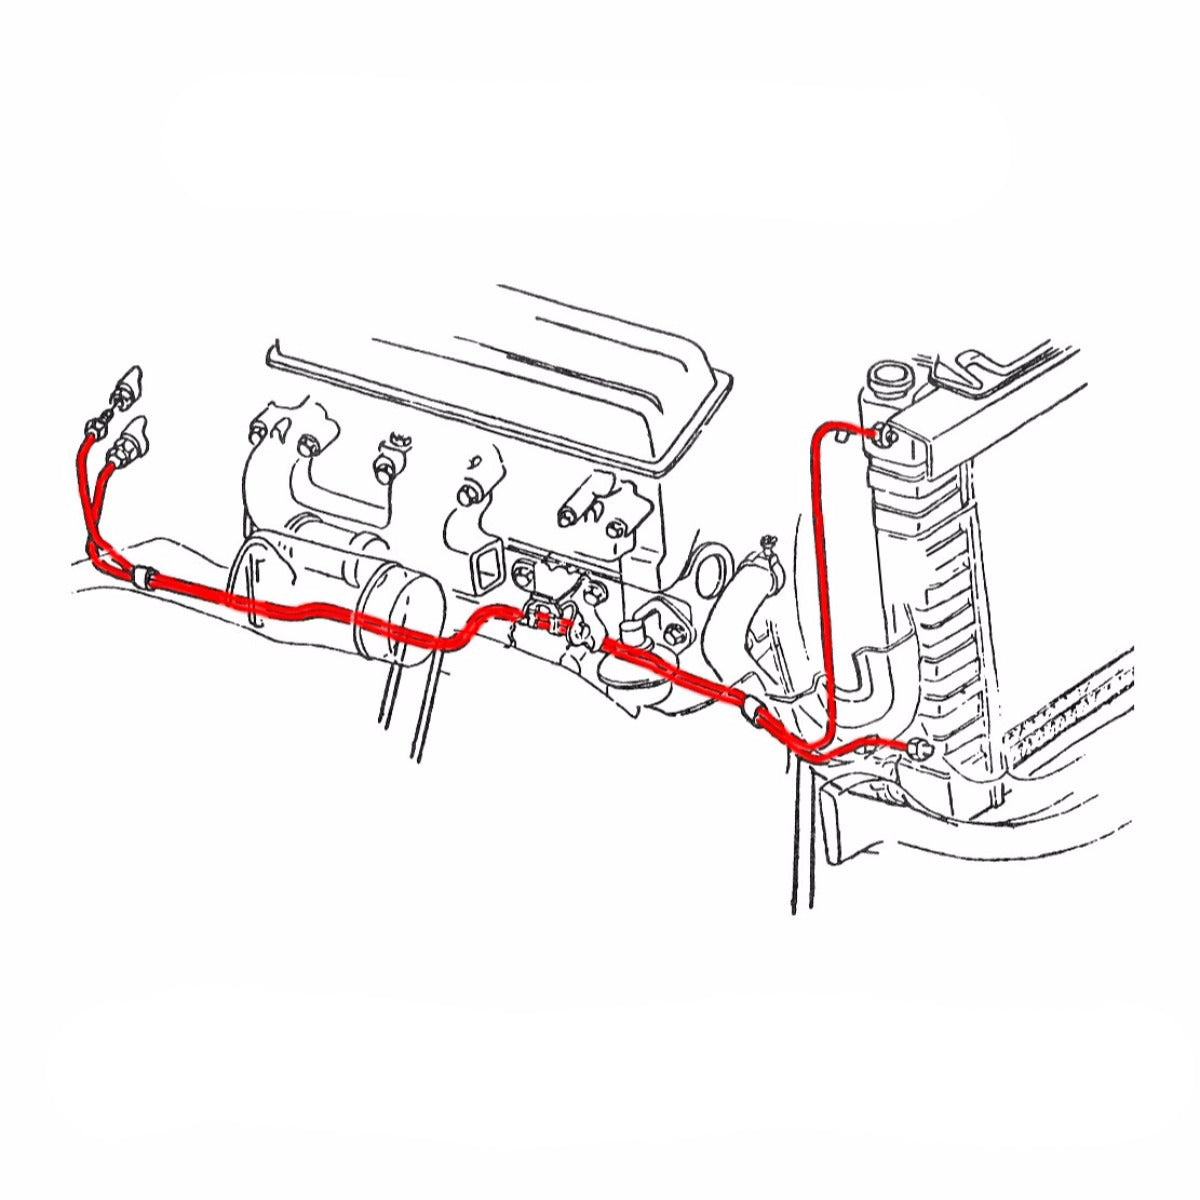 Spring clips on transmittion line to Radiator